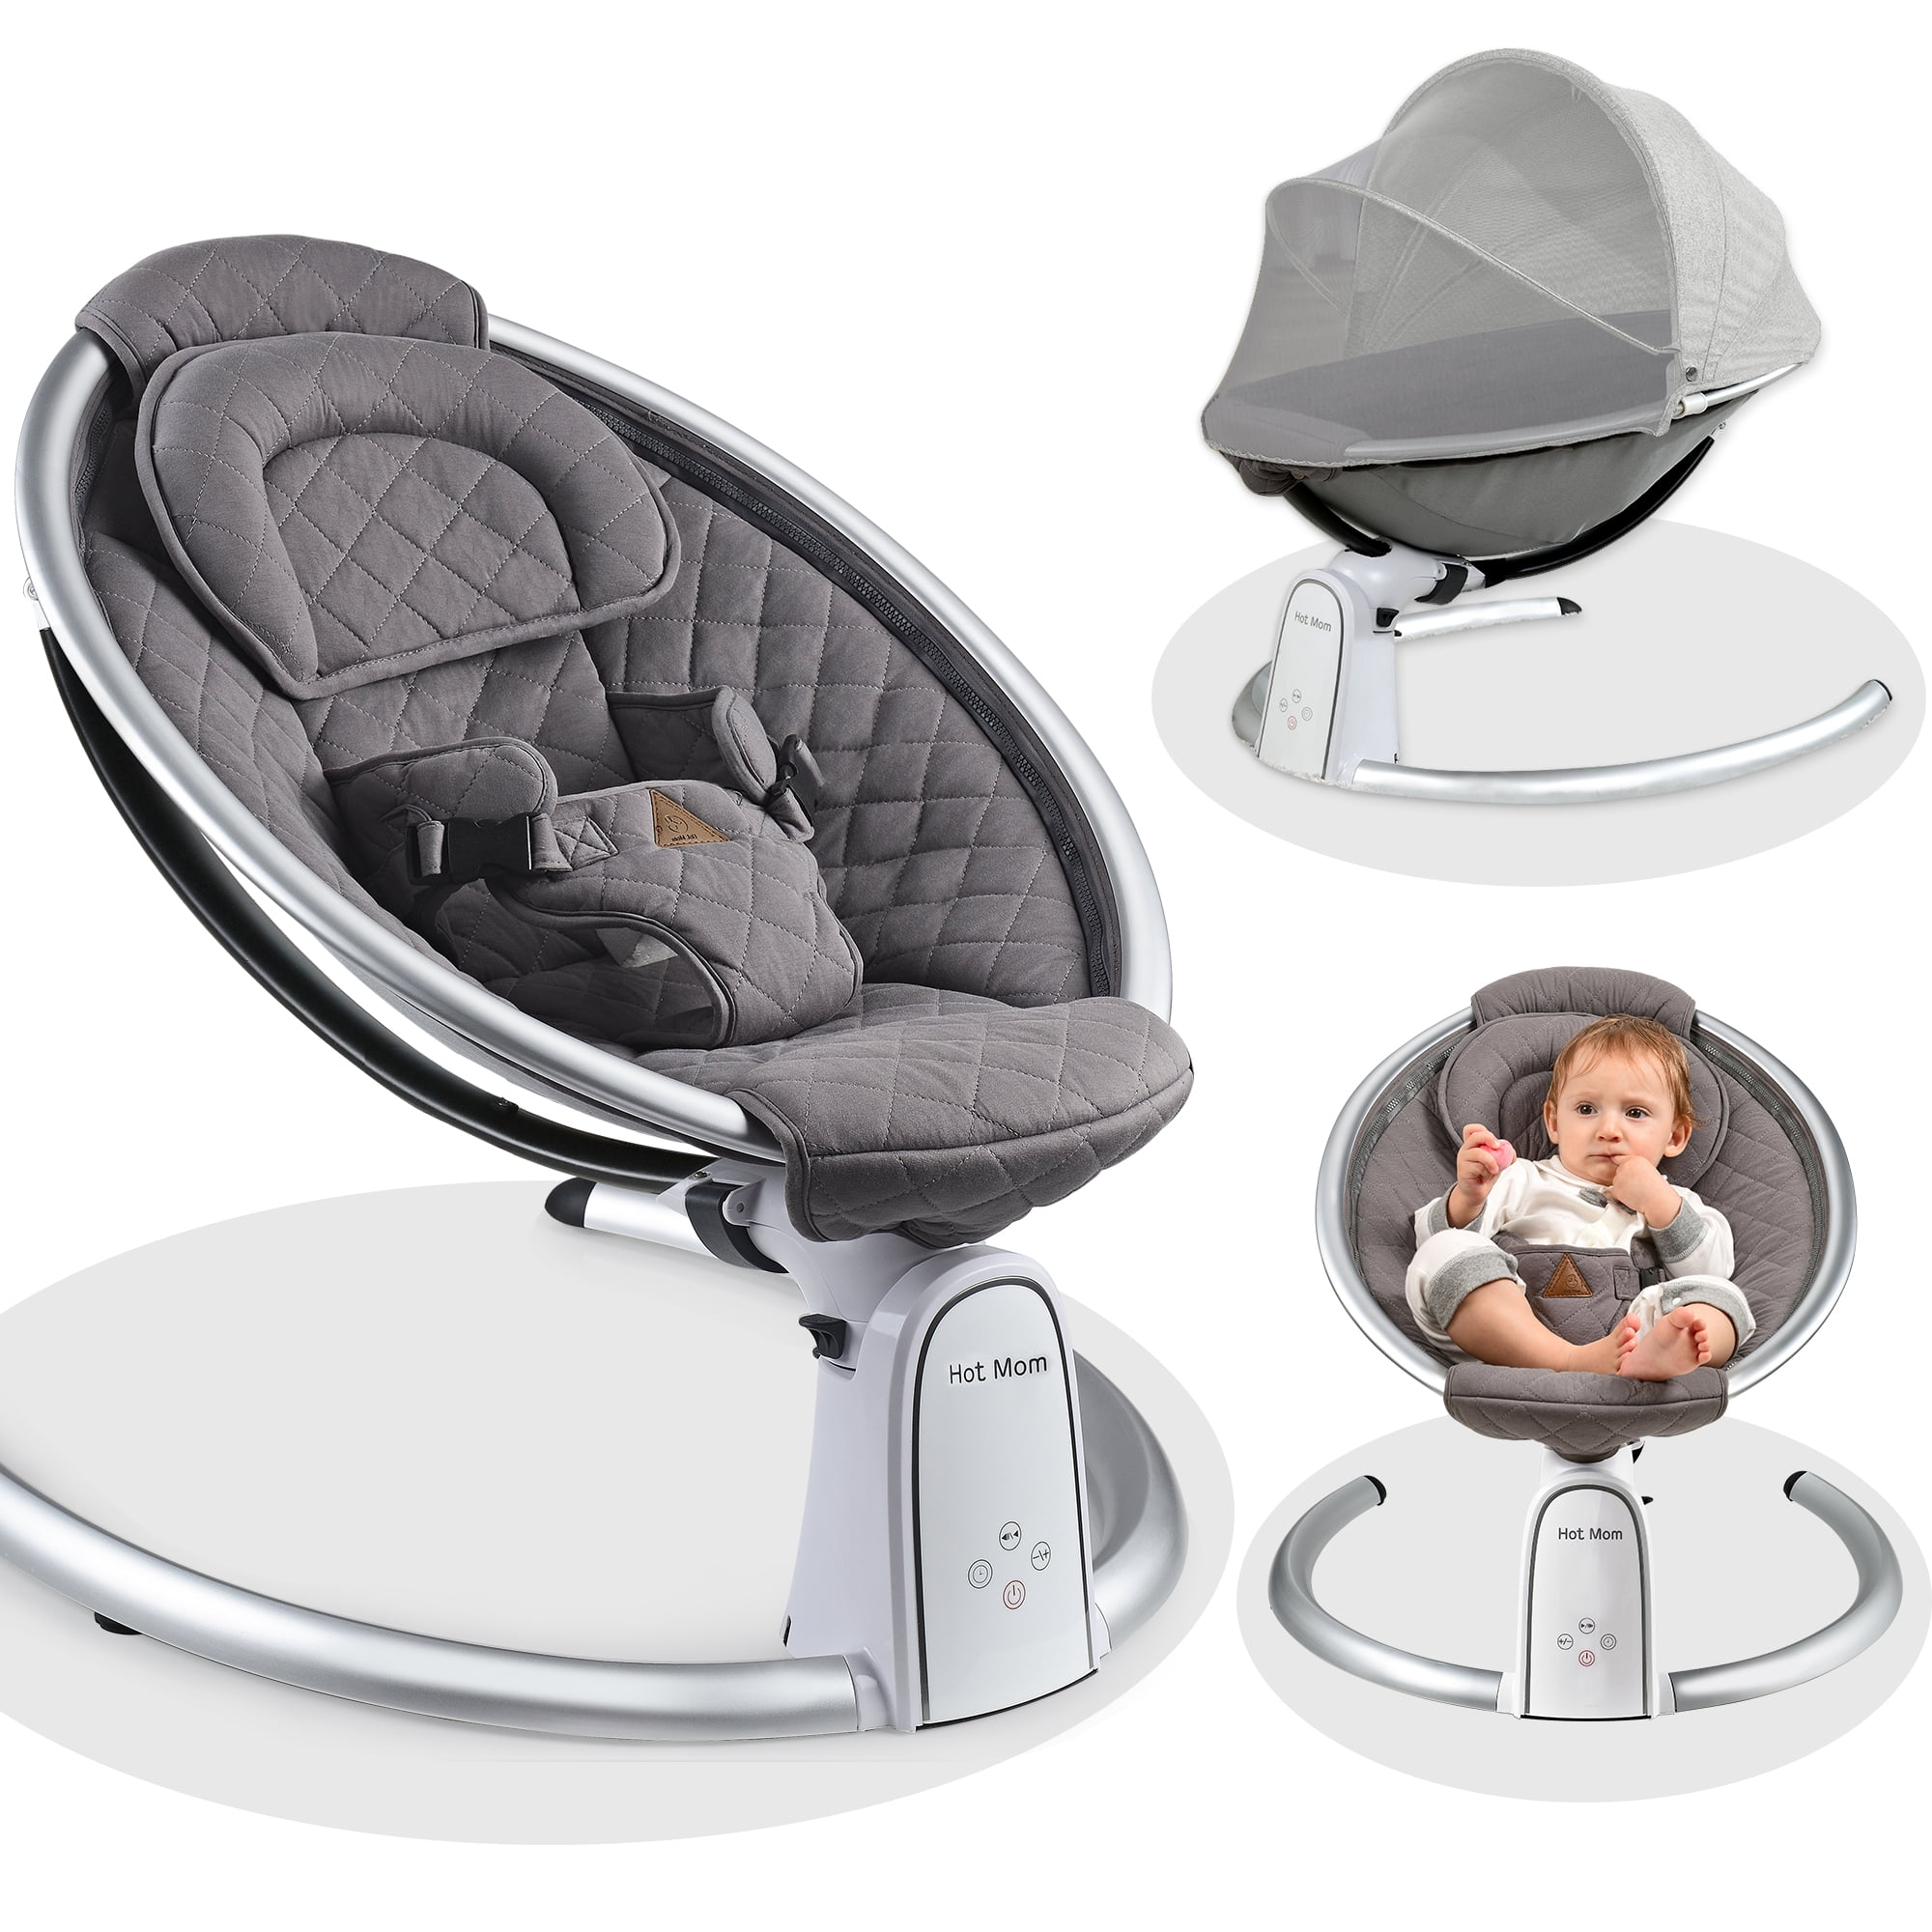 The Best Baby Bouncers and Rockers